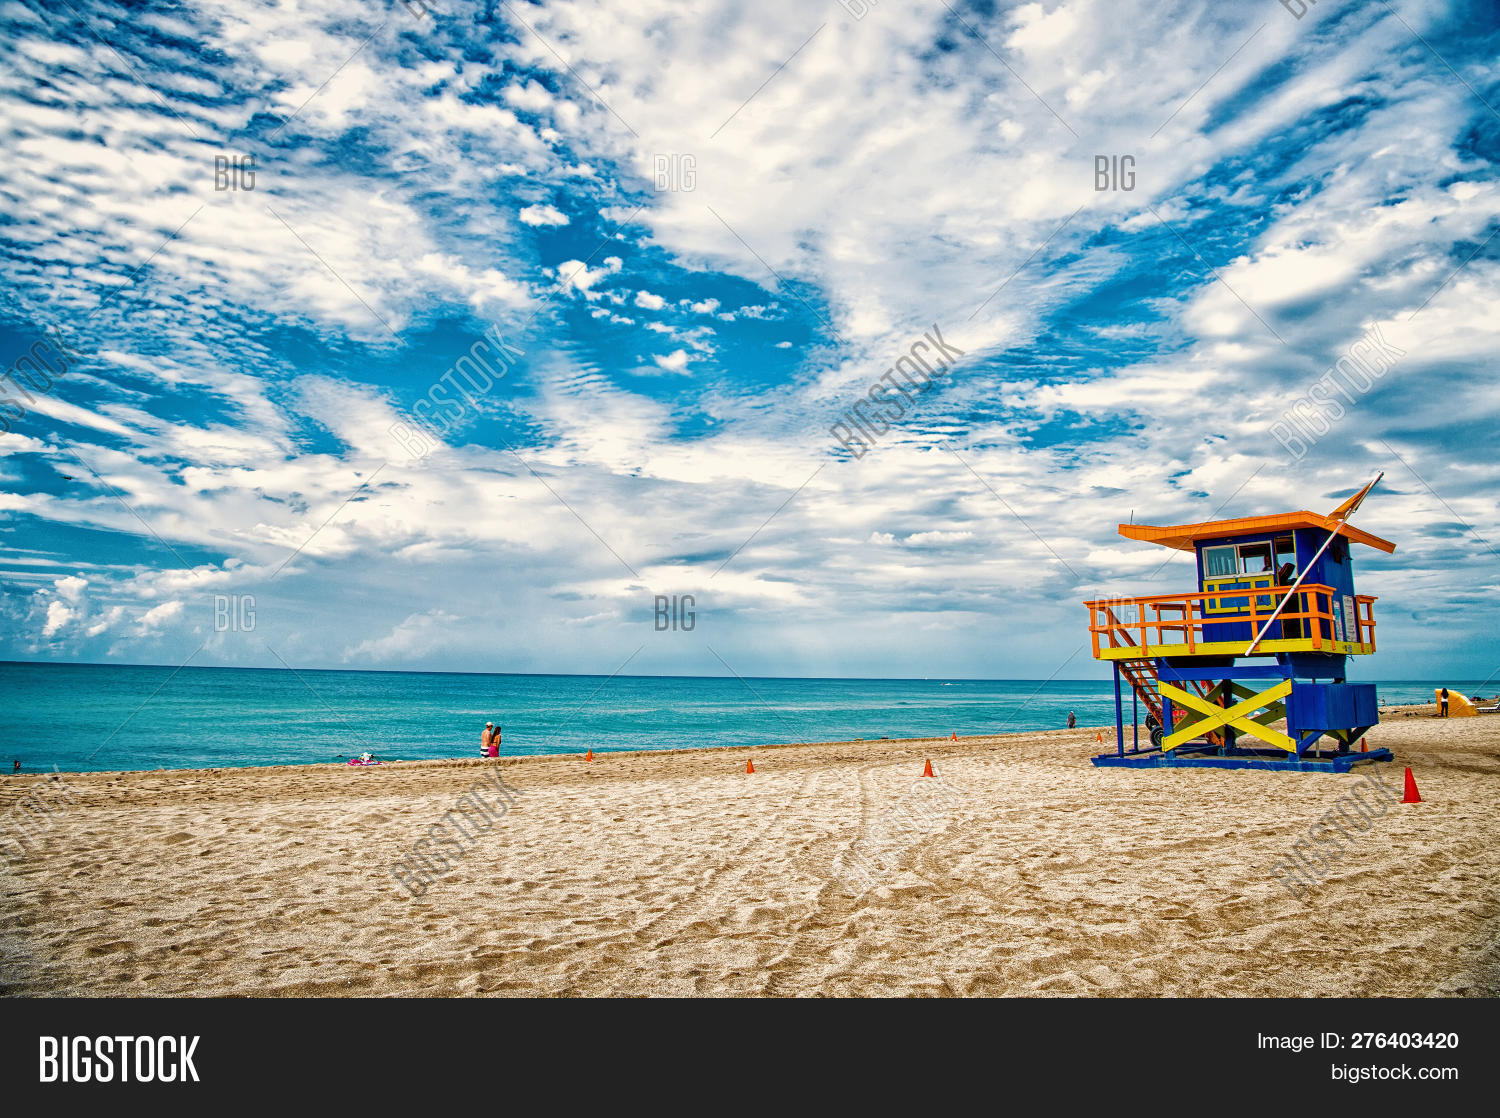 Lifeguard Tower Rescue Image Photo Trial Bigstock